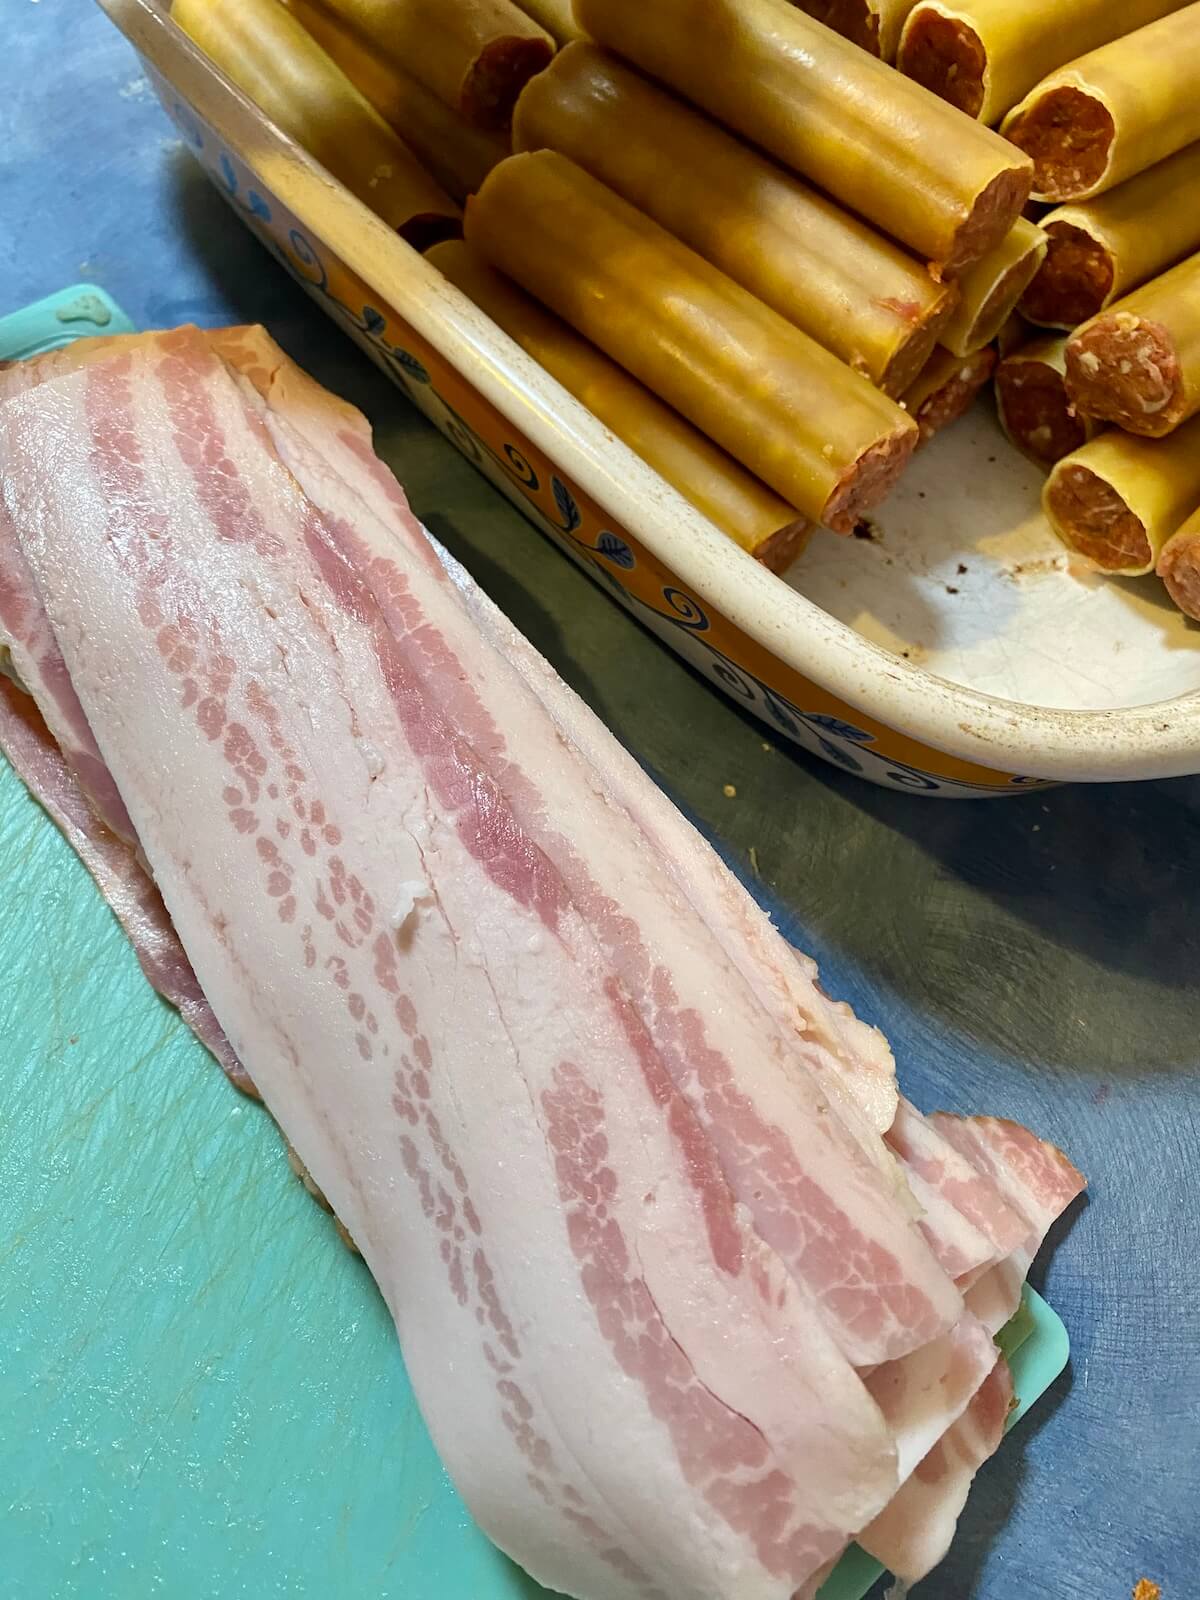 slices of bacon on a chopping board next to a tray of stuffed cannelloni shells.